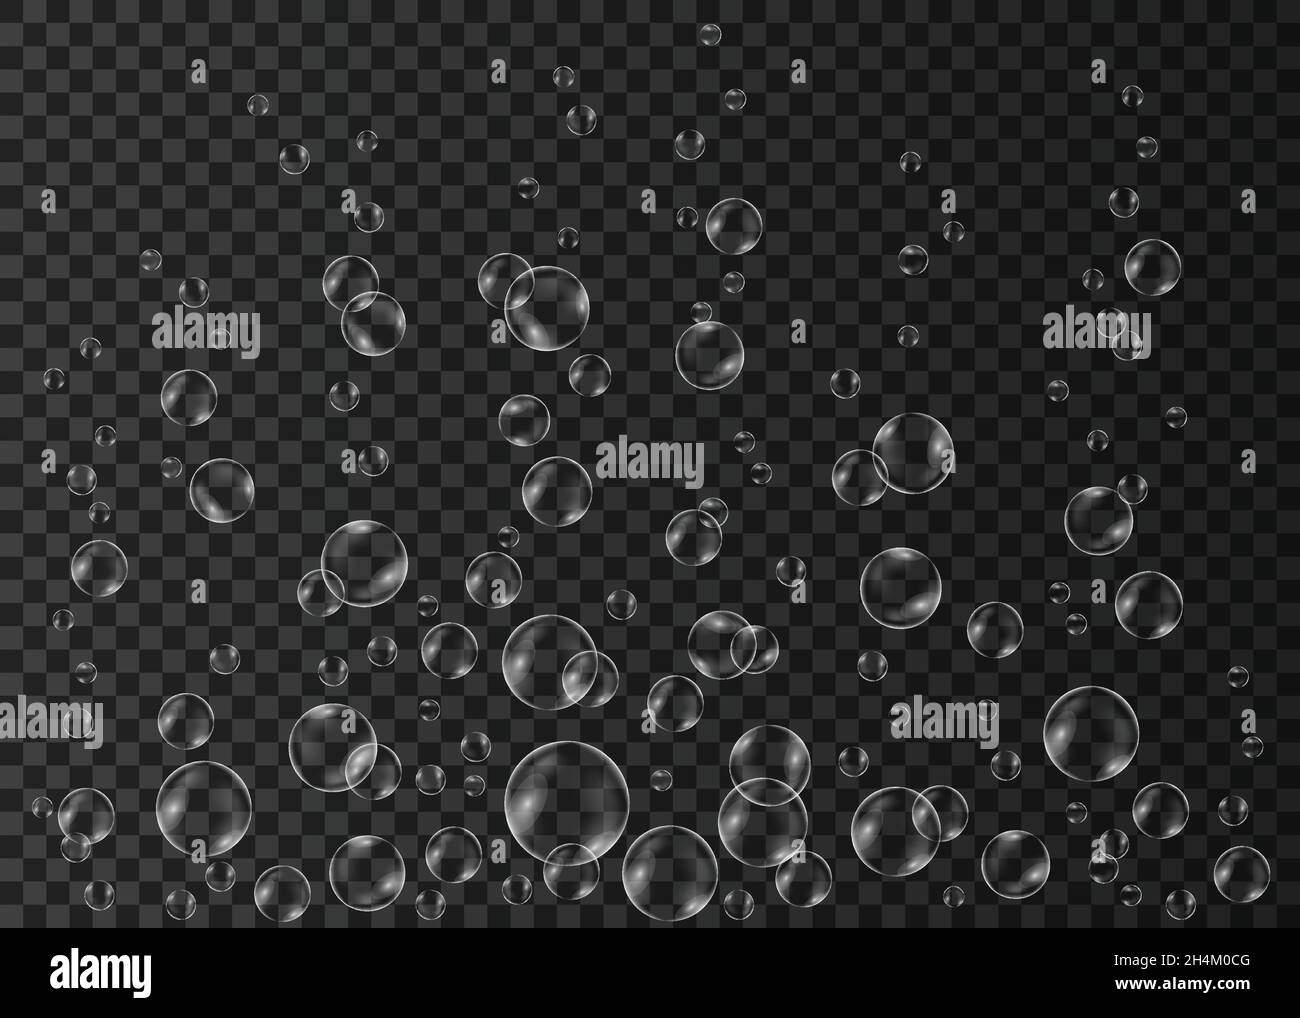 Fizzing  white air bubbles on transparent  background. Fizzy sparkles in water, sea, aquarium, ocean. Champagne texture. Undersea vector illustration. Stock Vector